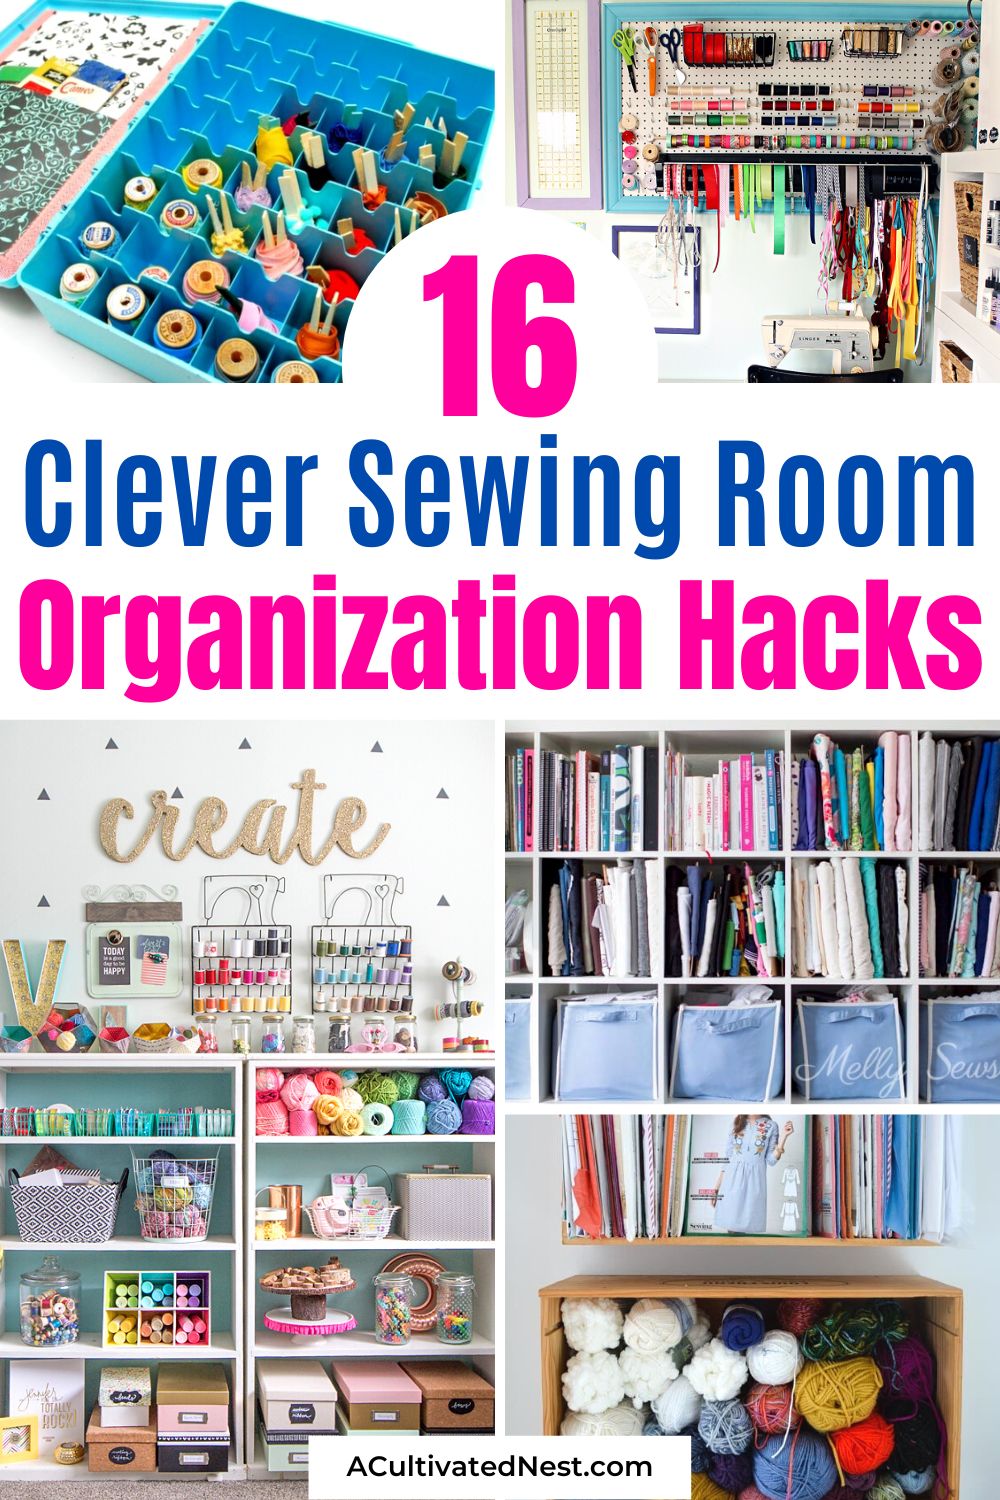 16 Clever Sewing Room Organization Hacks- Say goodbye to clutter and hello to creativity! Discover genius sewing room organization hacks to tidy up your space and make every project a breeze. | #craftOrganization #organizingTips #organization #sewing #ACultivatedNest